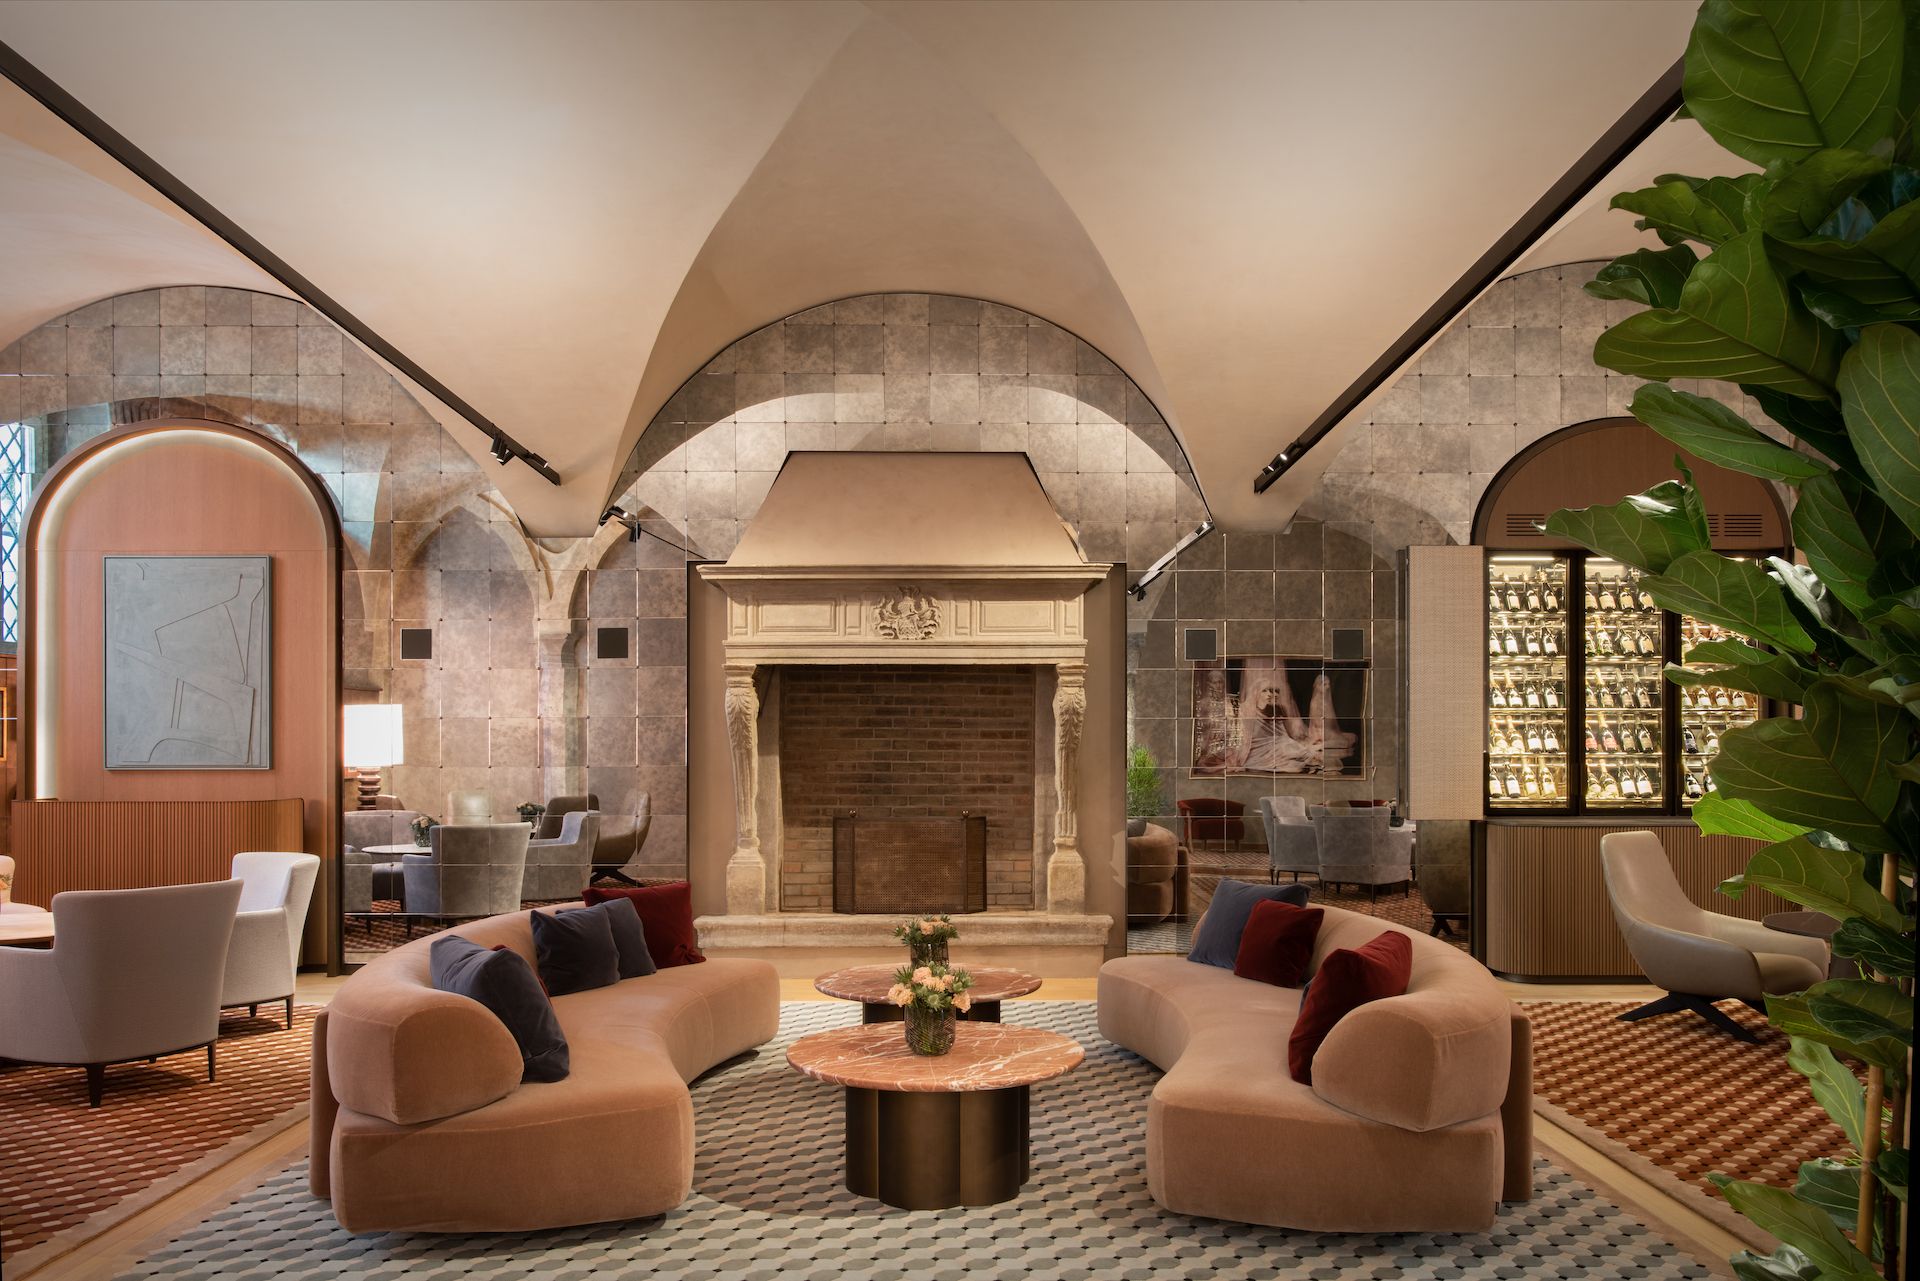 Milan Design Week 2021: Book your room with NH Hotel Group